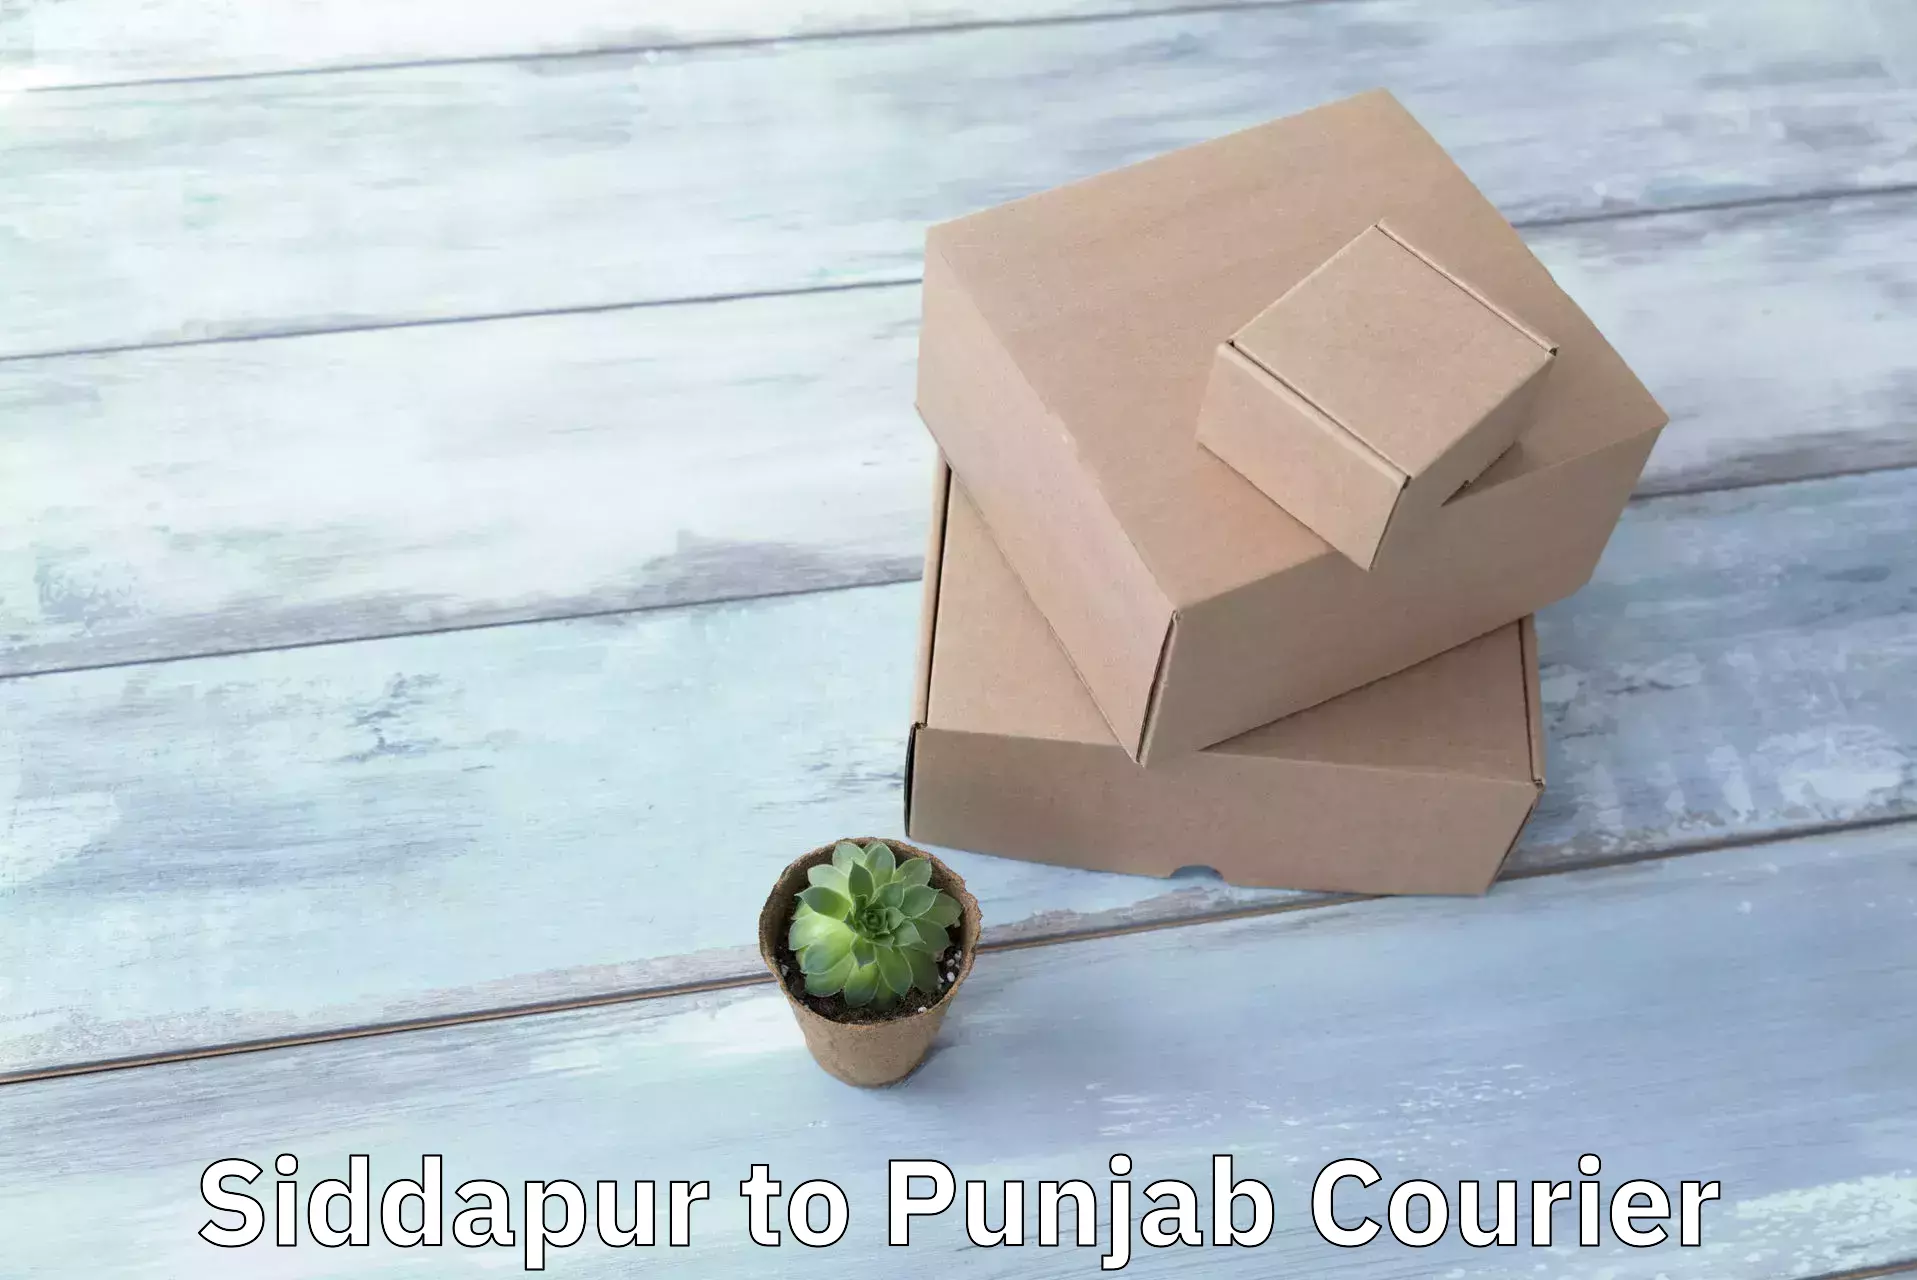 Efficient package consolidation Siddapur to Punjab